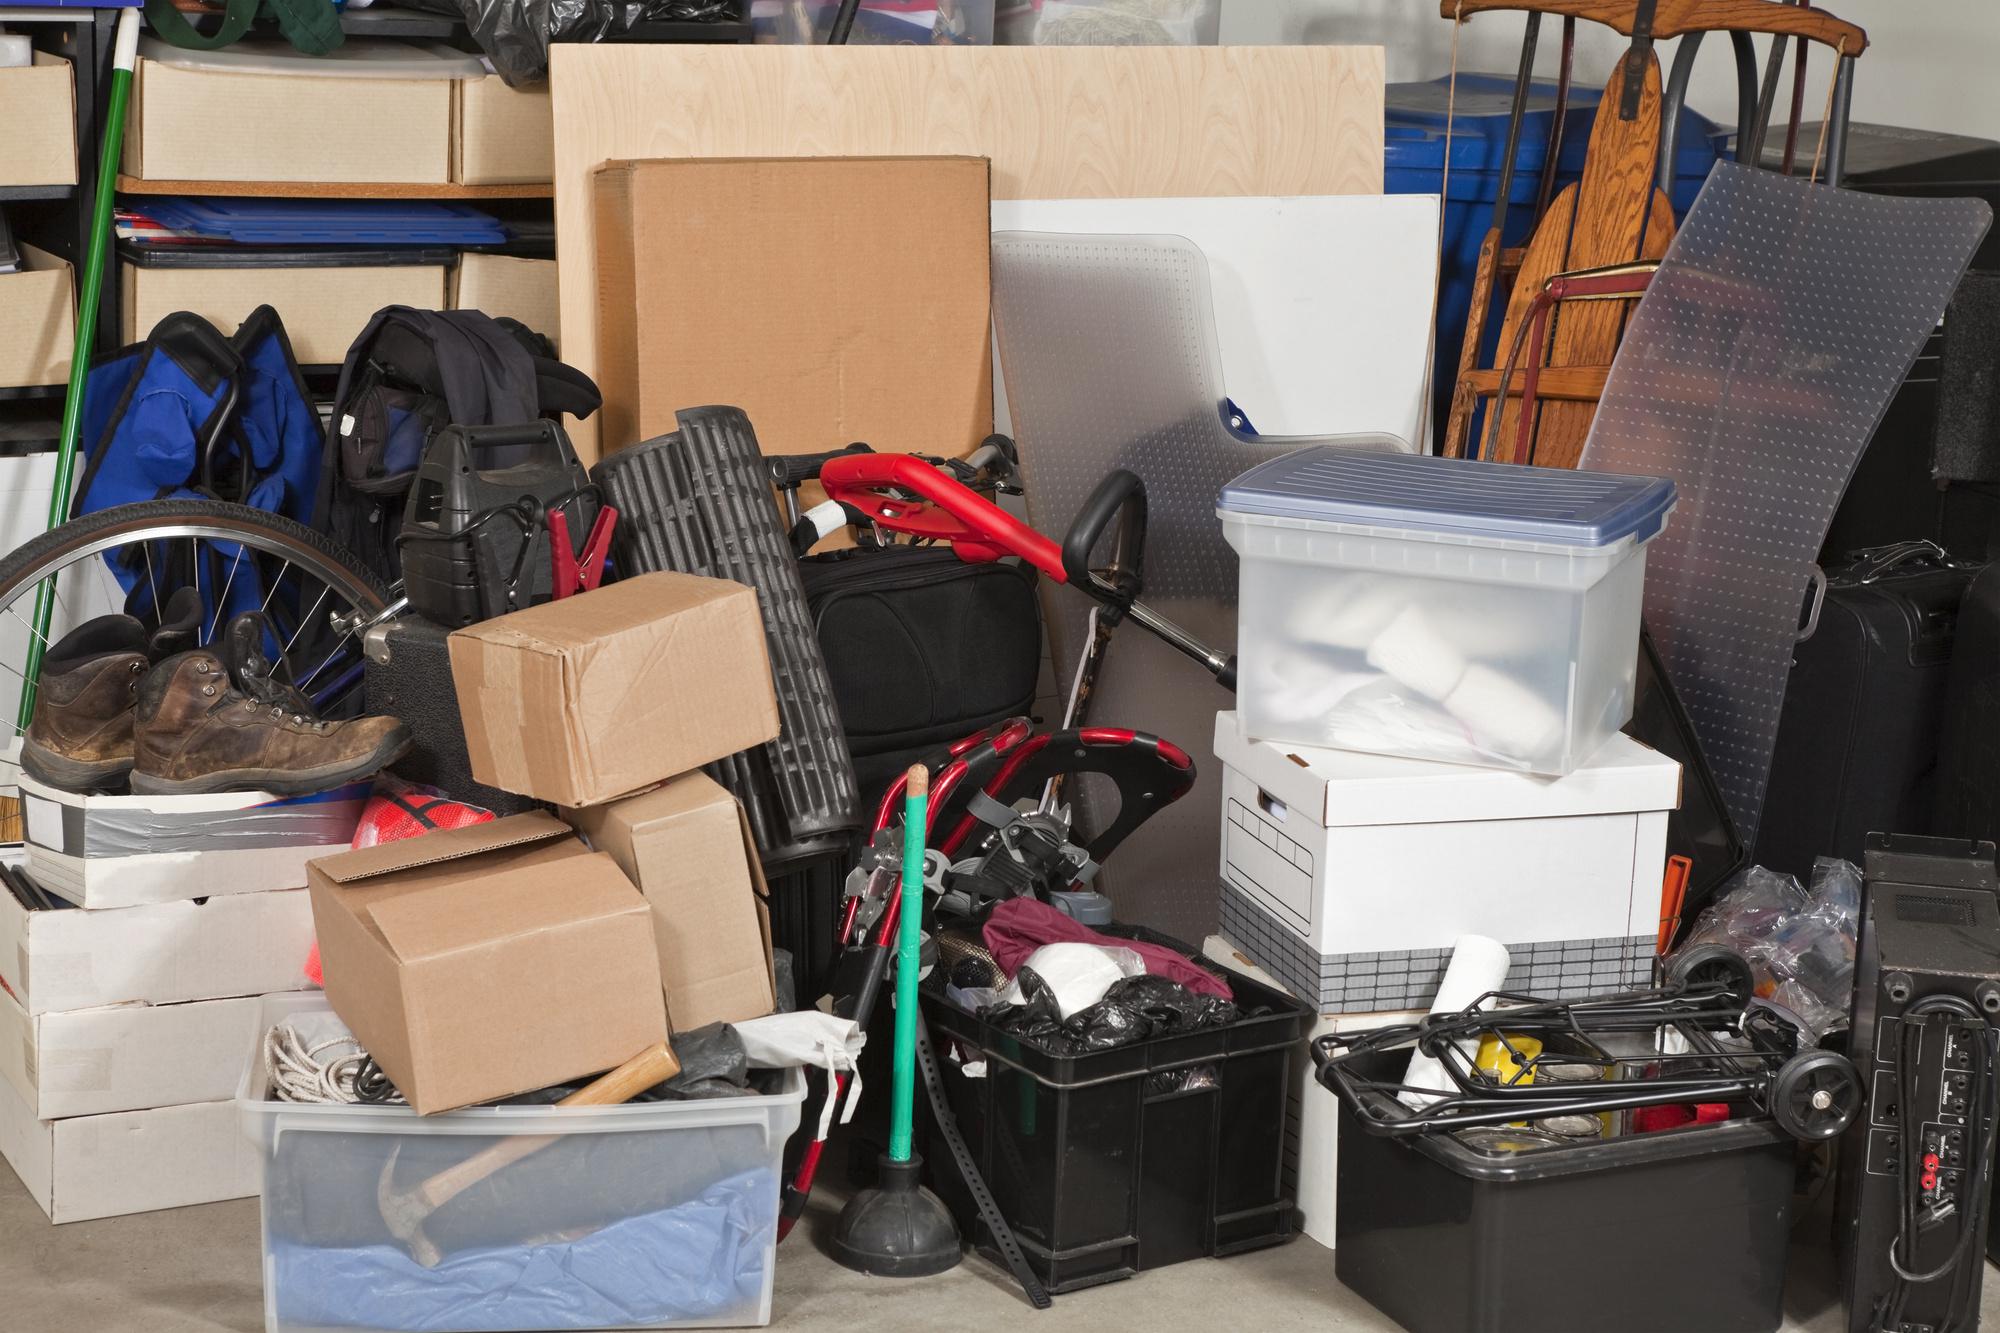 9 Things You Can't Safely Store in Your Garage